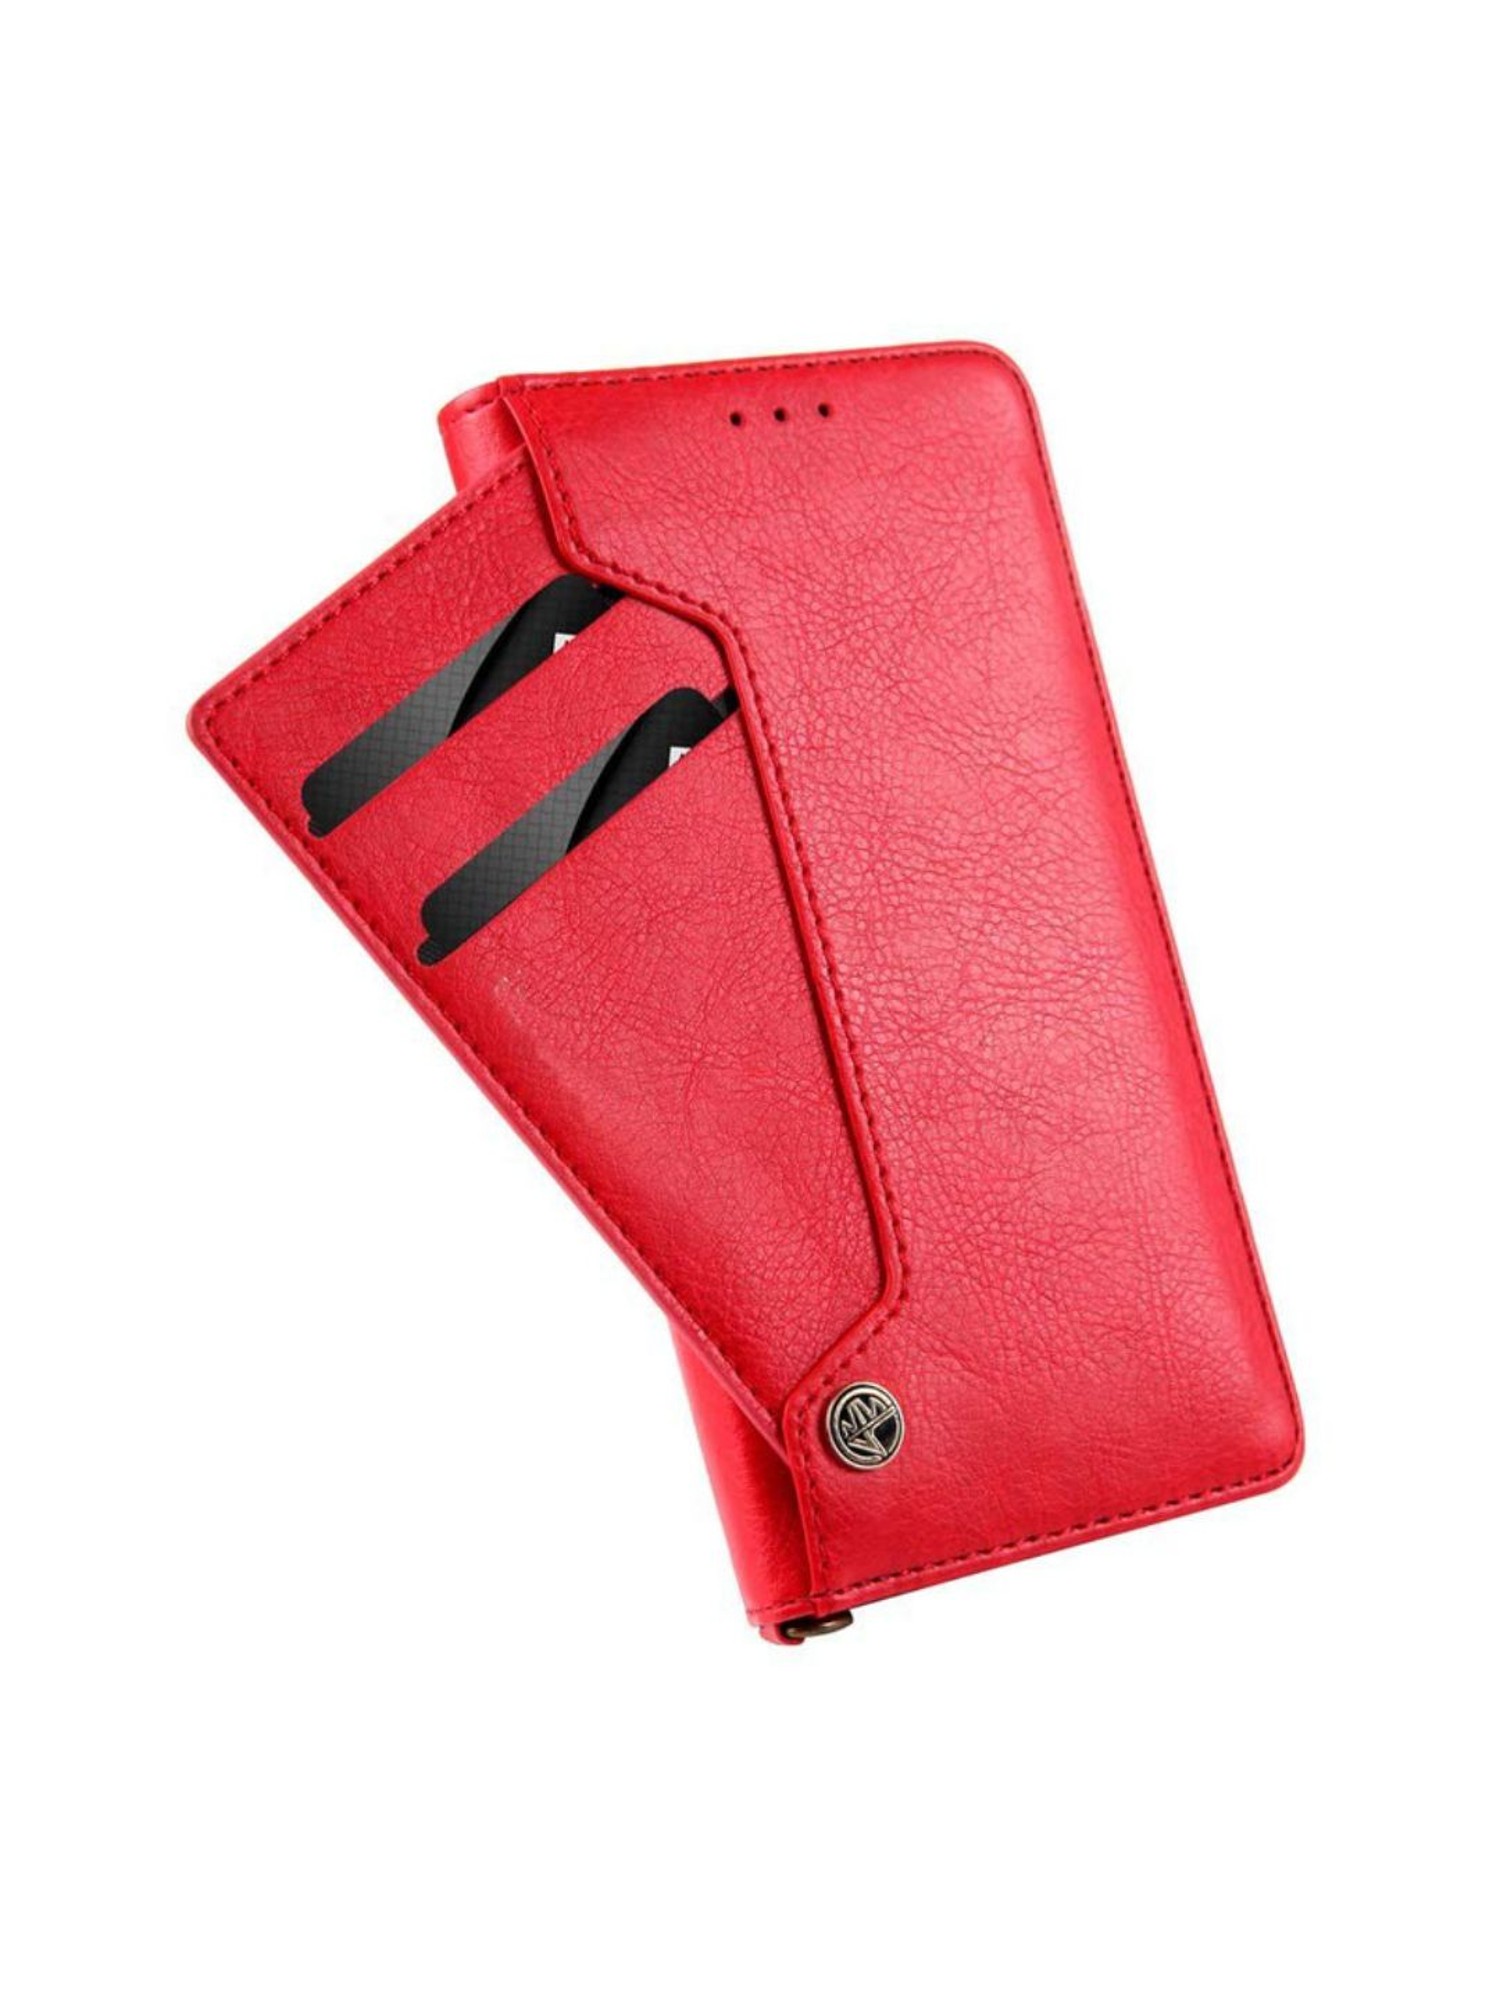 ClickCase Flipper Leather Wallet Case Flip Cover For iPhone 13 Pro Max (Red)